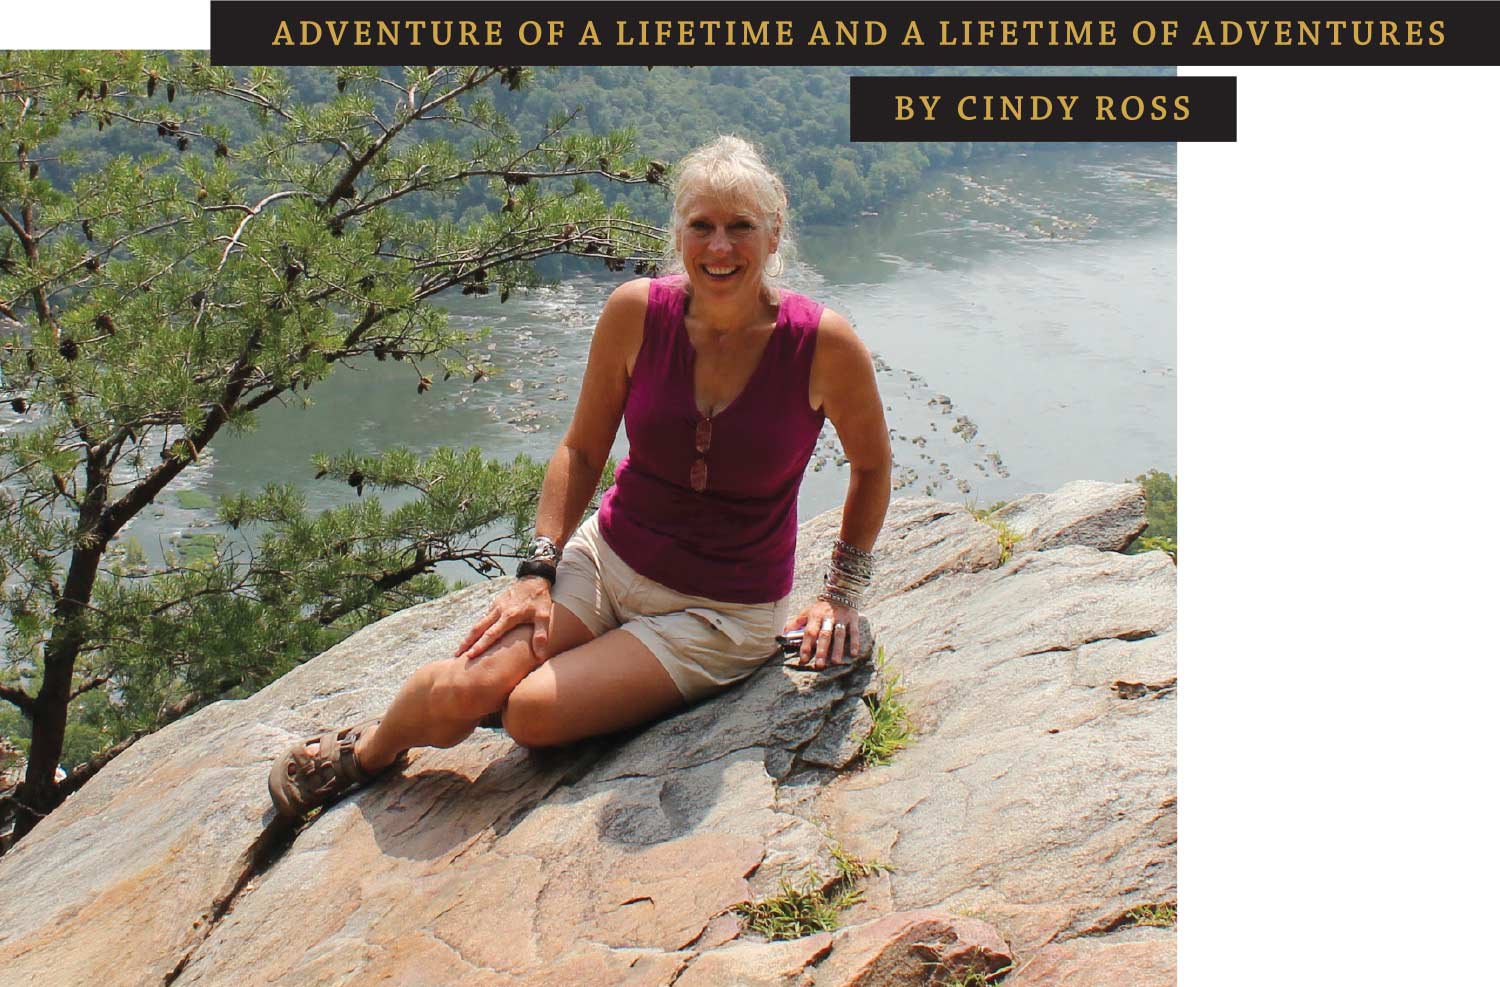 Adventure of a lifetime and a lifetime of adventures by cindy ross